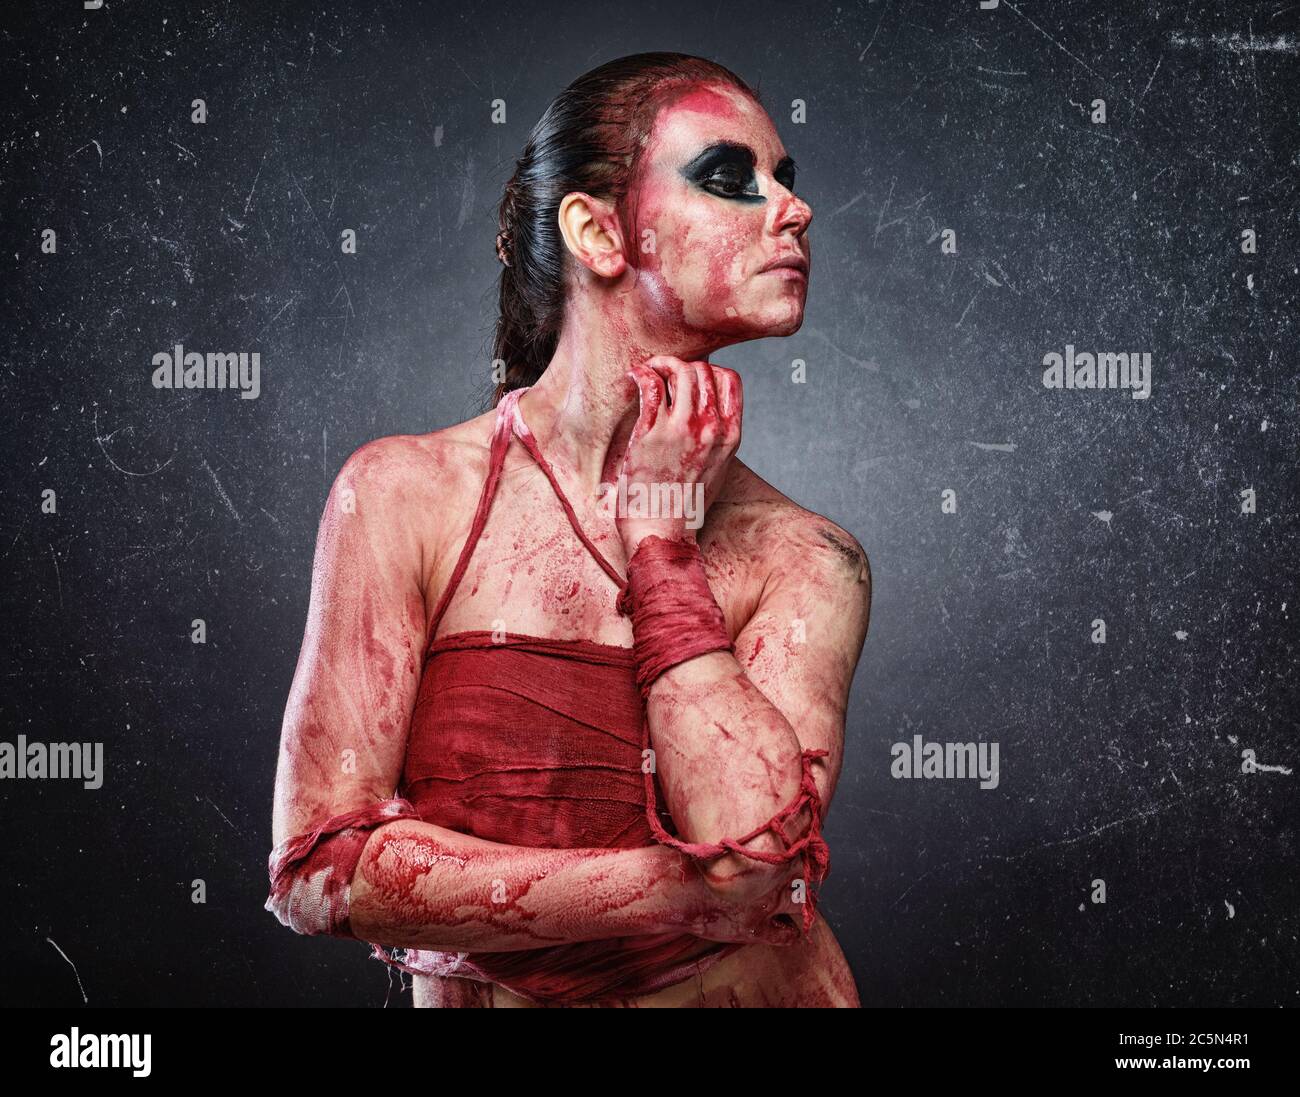 Horror photo of young woman in fake red blood Stock Photo